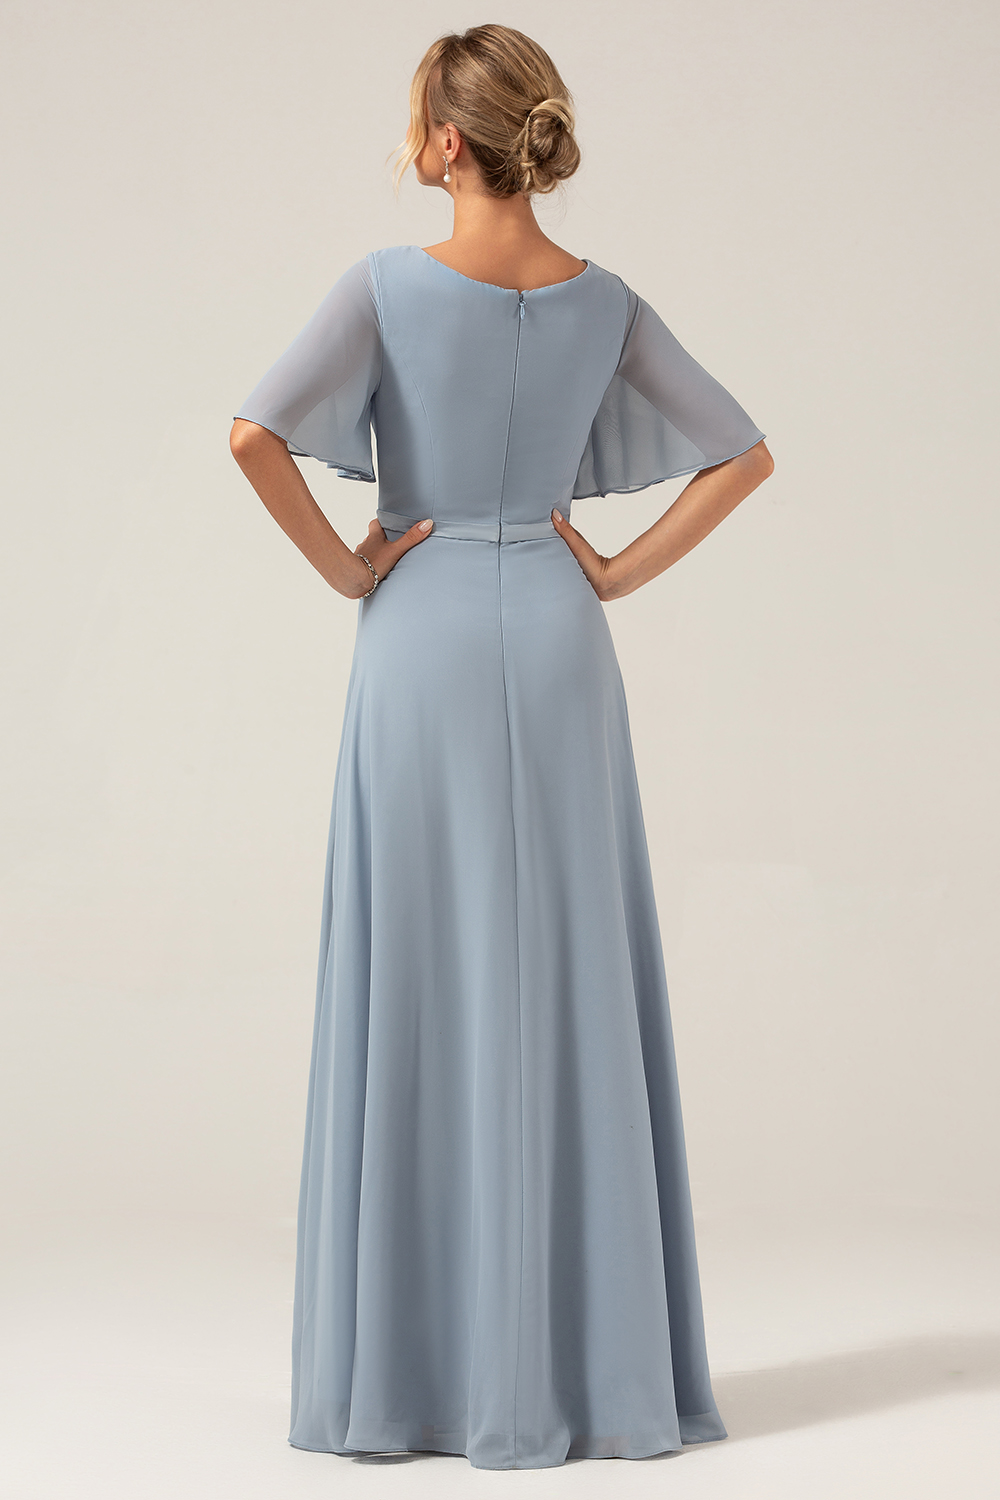 Dusty Blue A Line Chiffon V Neck Mother of Bride Dress with Short Sleeves